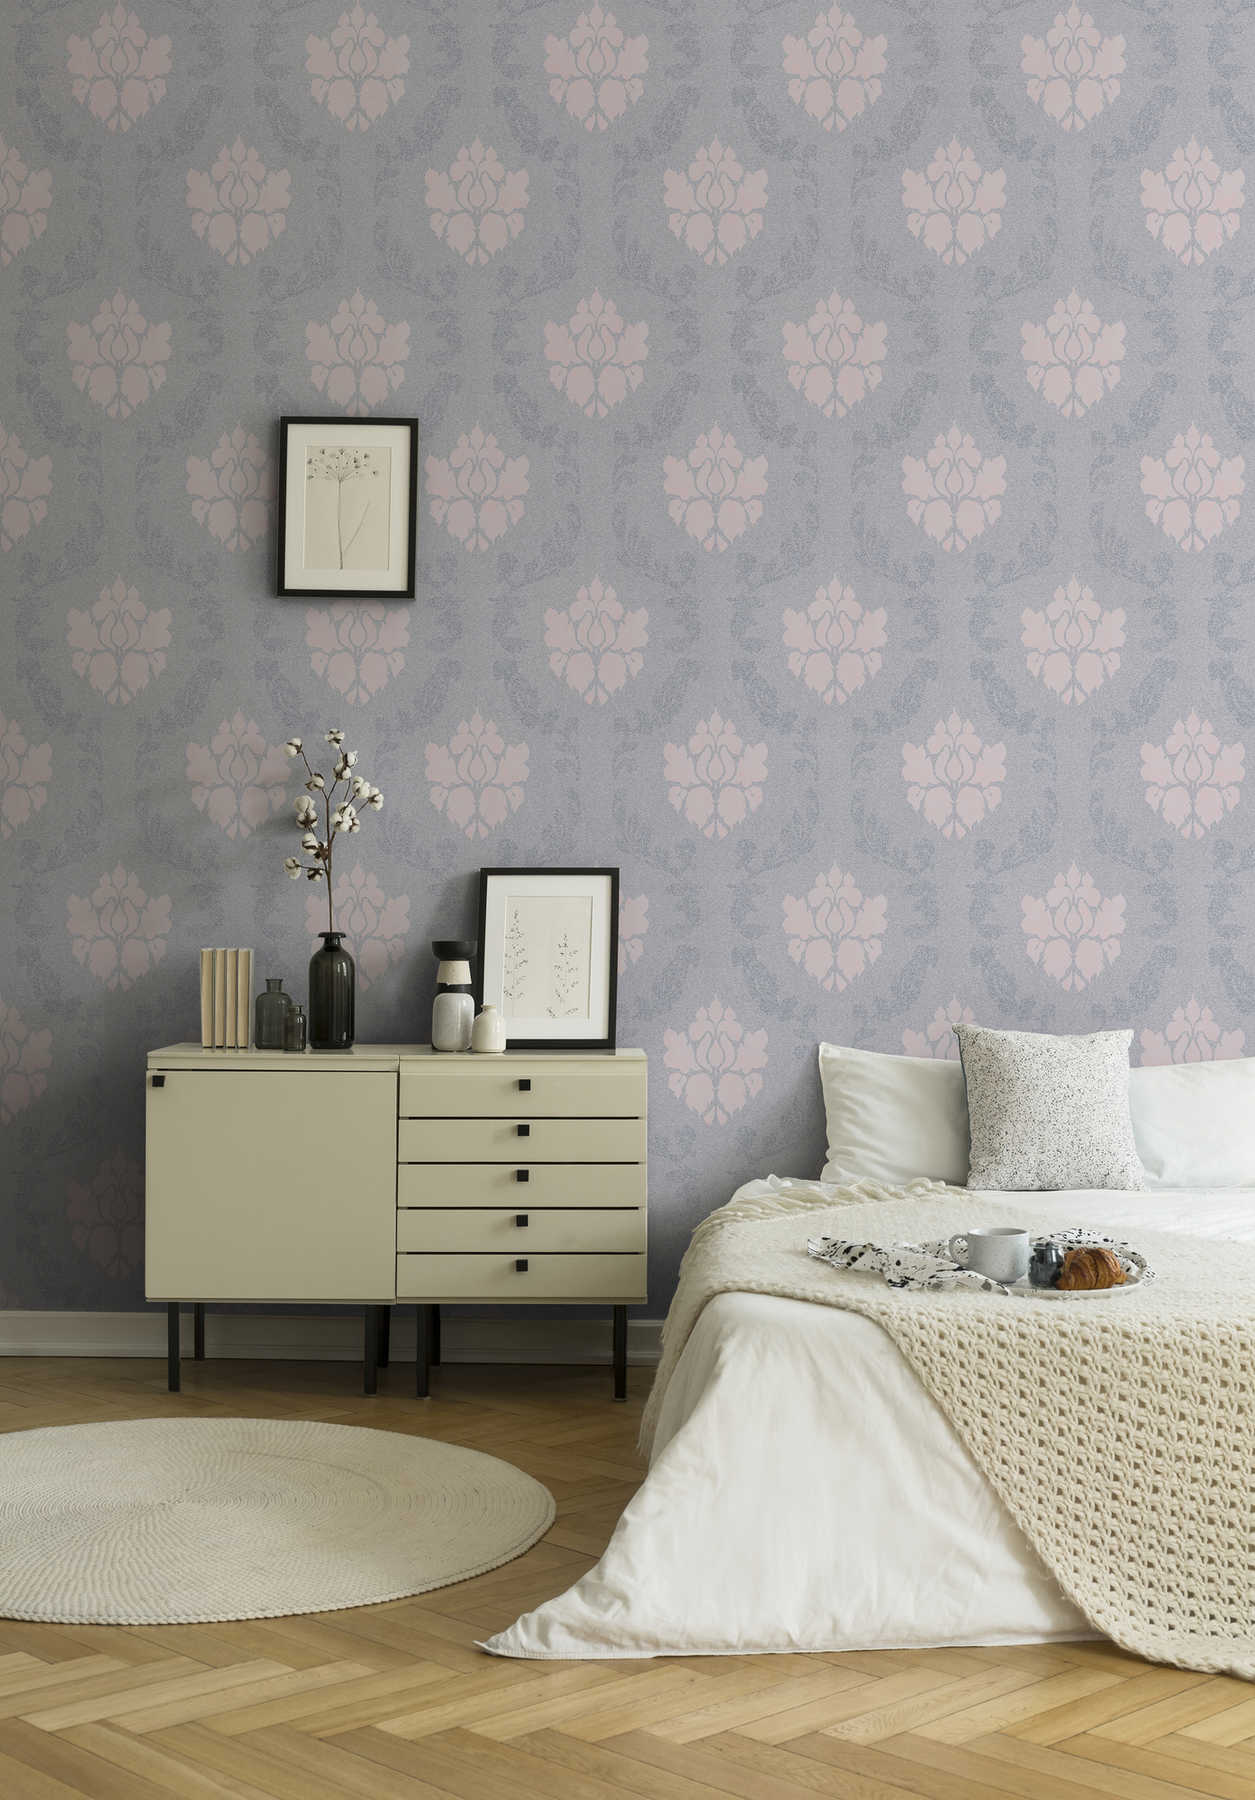             Ornament wallpaper with linen look - blue, pink
        